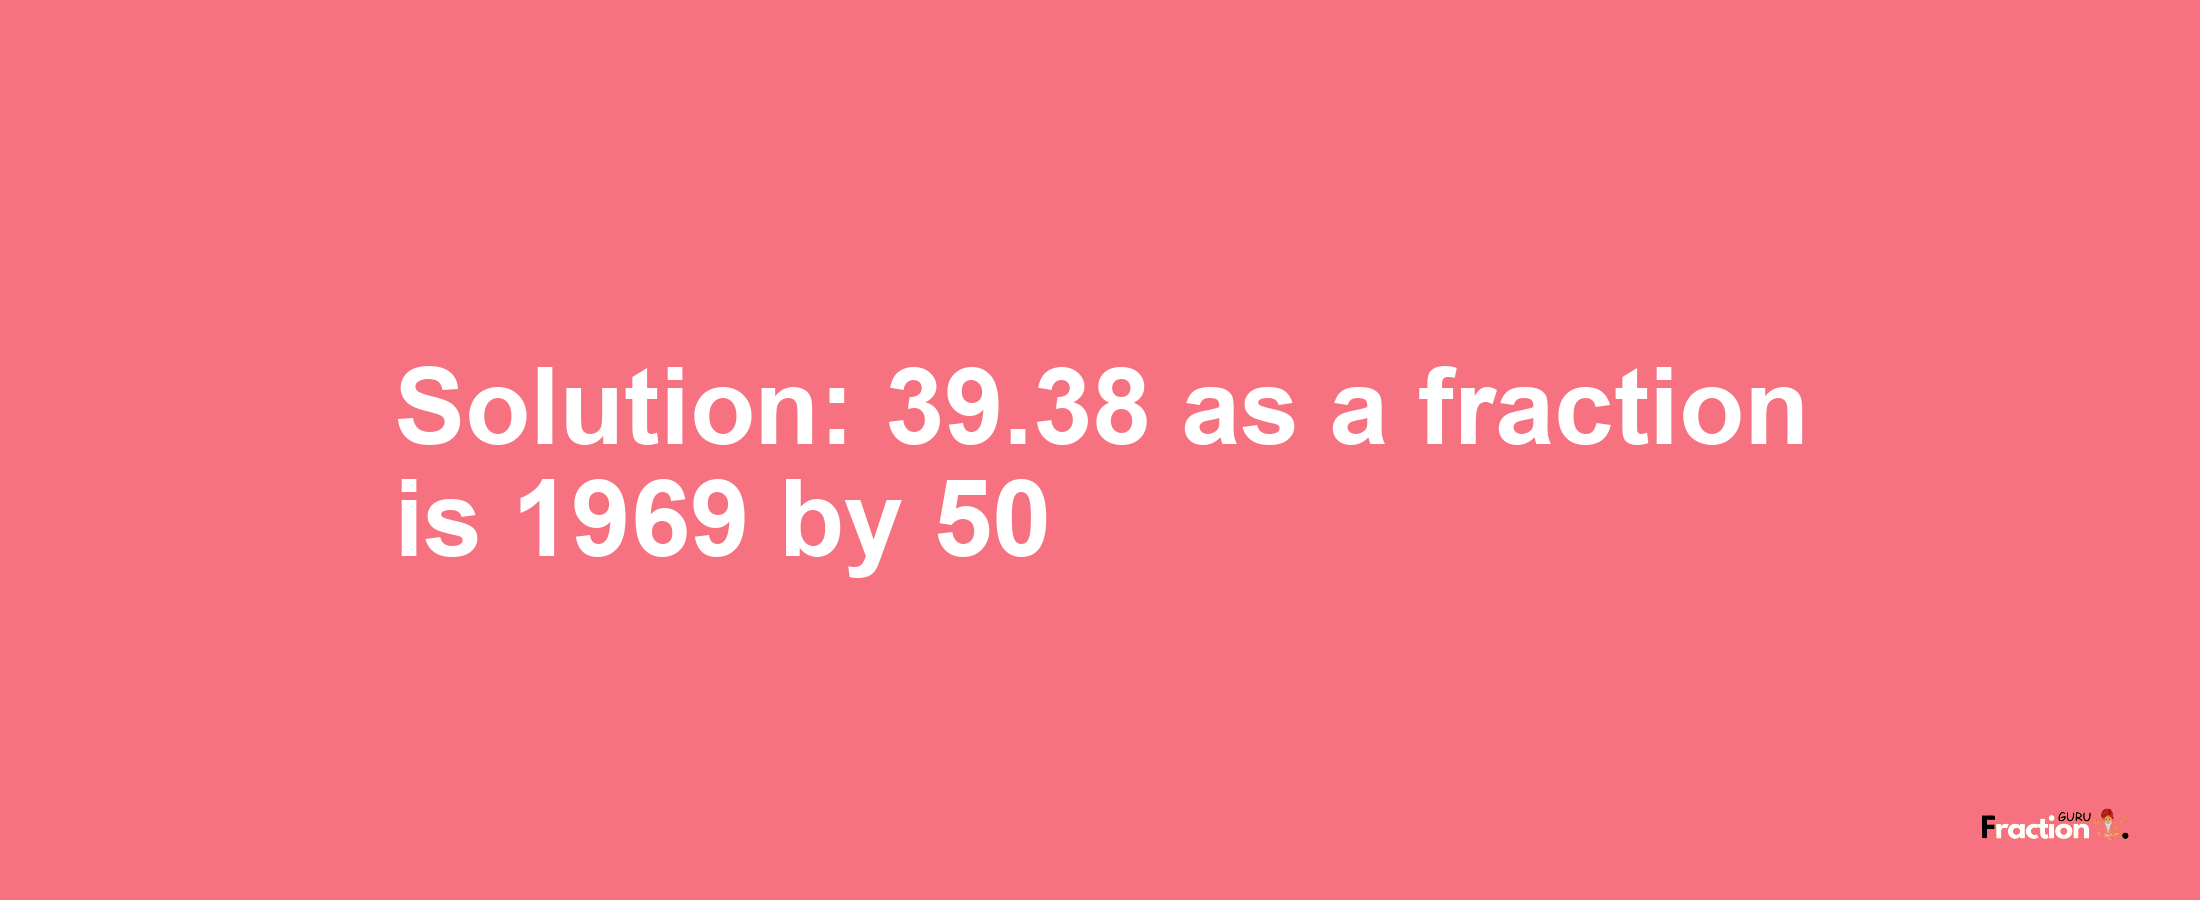 Solution:39.38 as a fraction is 1969/50